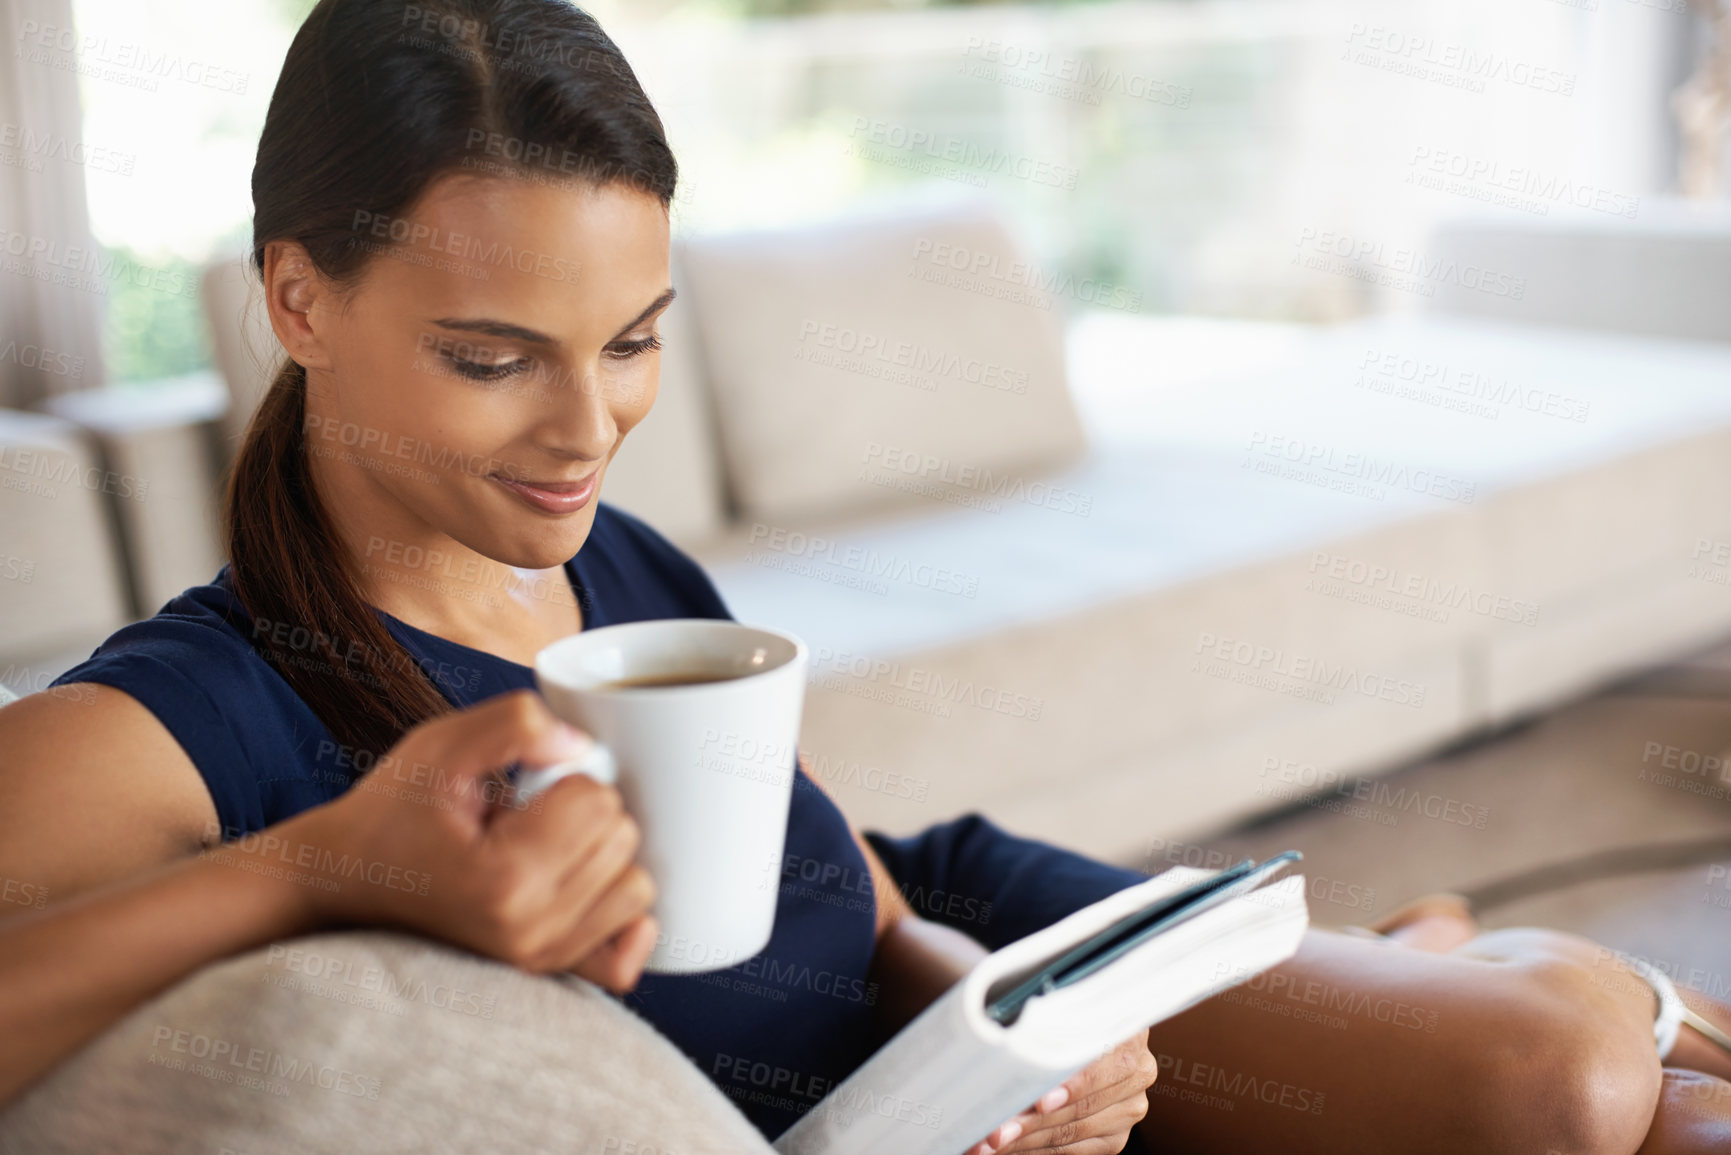 Buy stock photo Shot of a beautiful young woman relaxing with a book and a cup of coffee at home